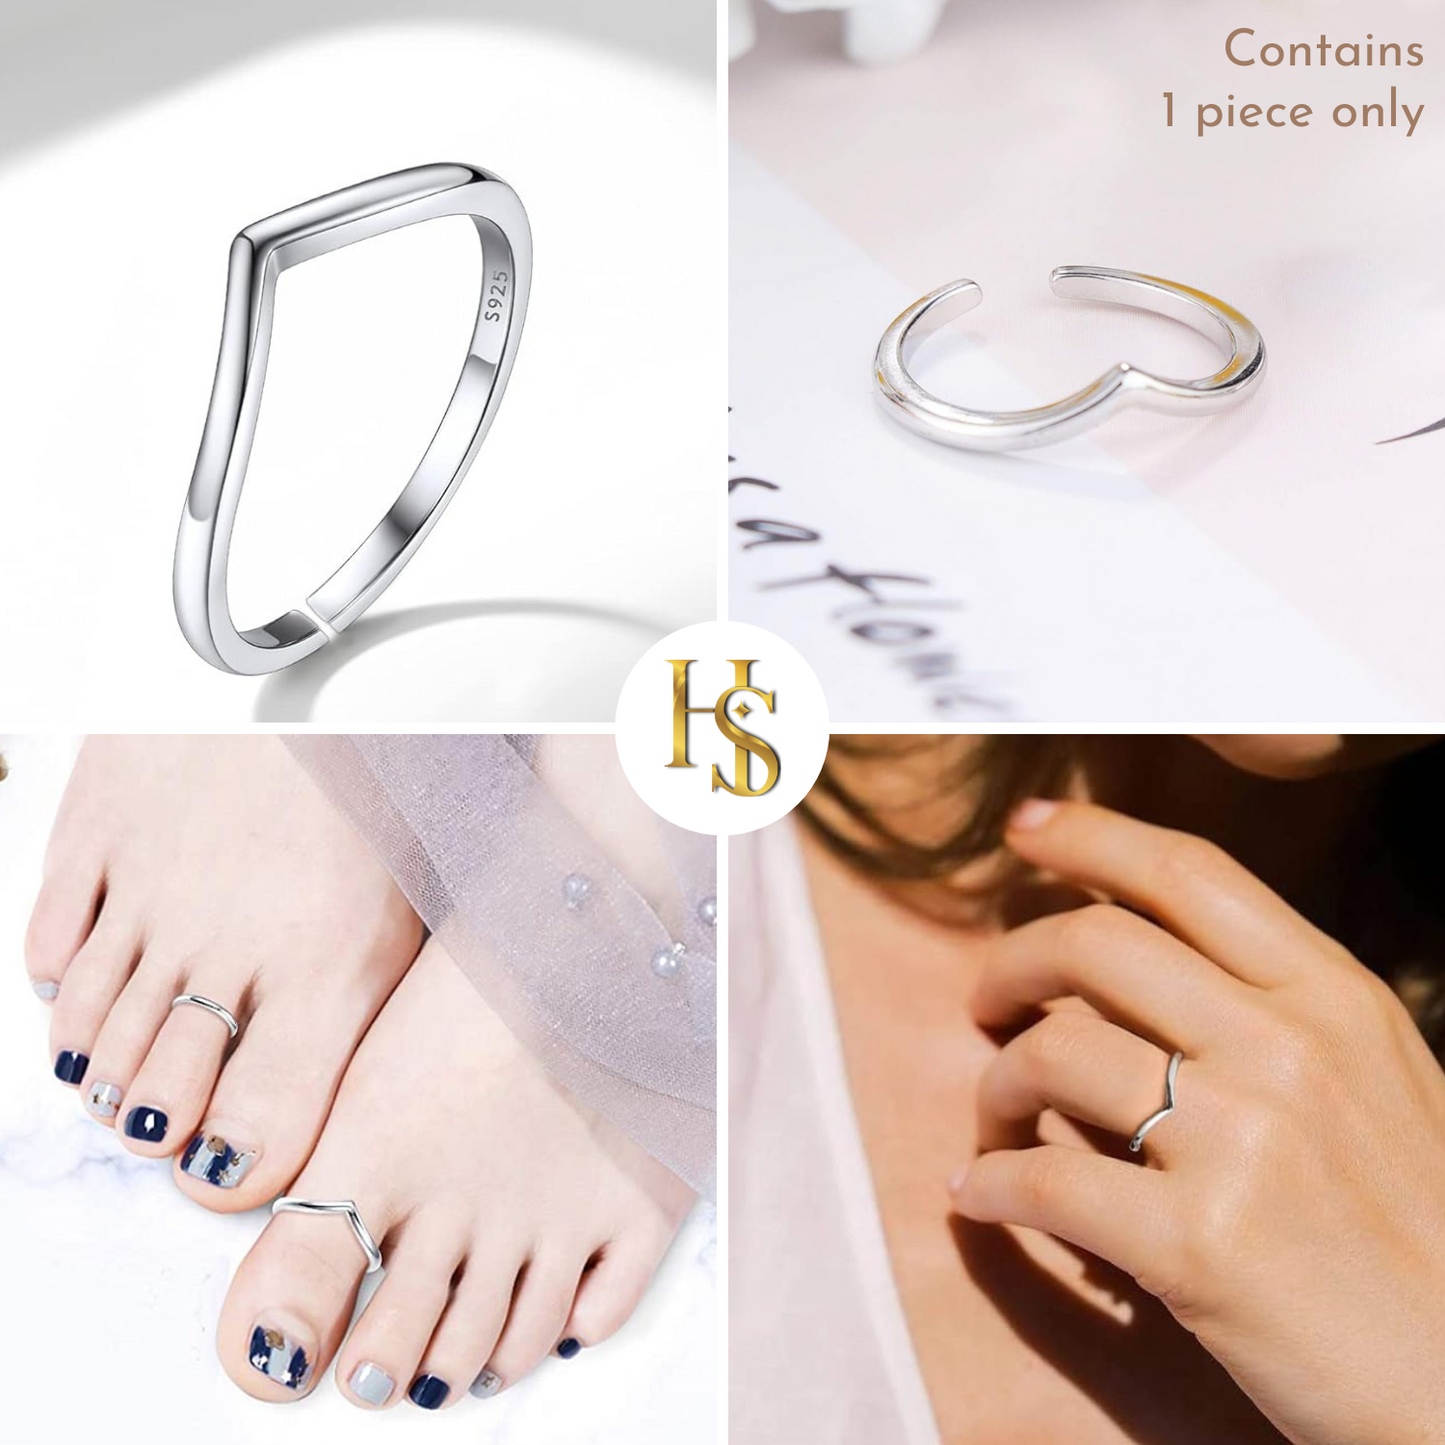 Royal Crown Toe Ring - Band Ring - 925 Sterling Silver - 1 Piece